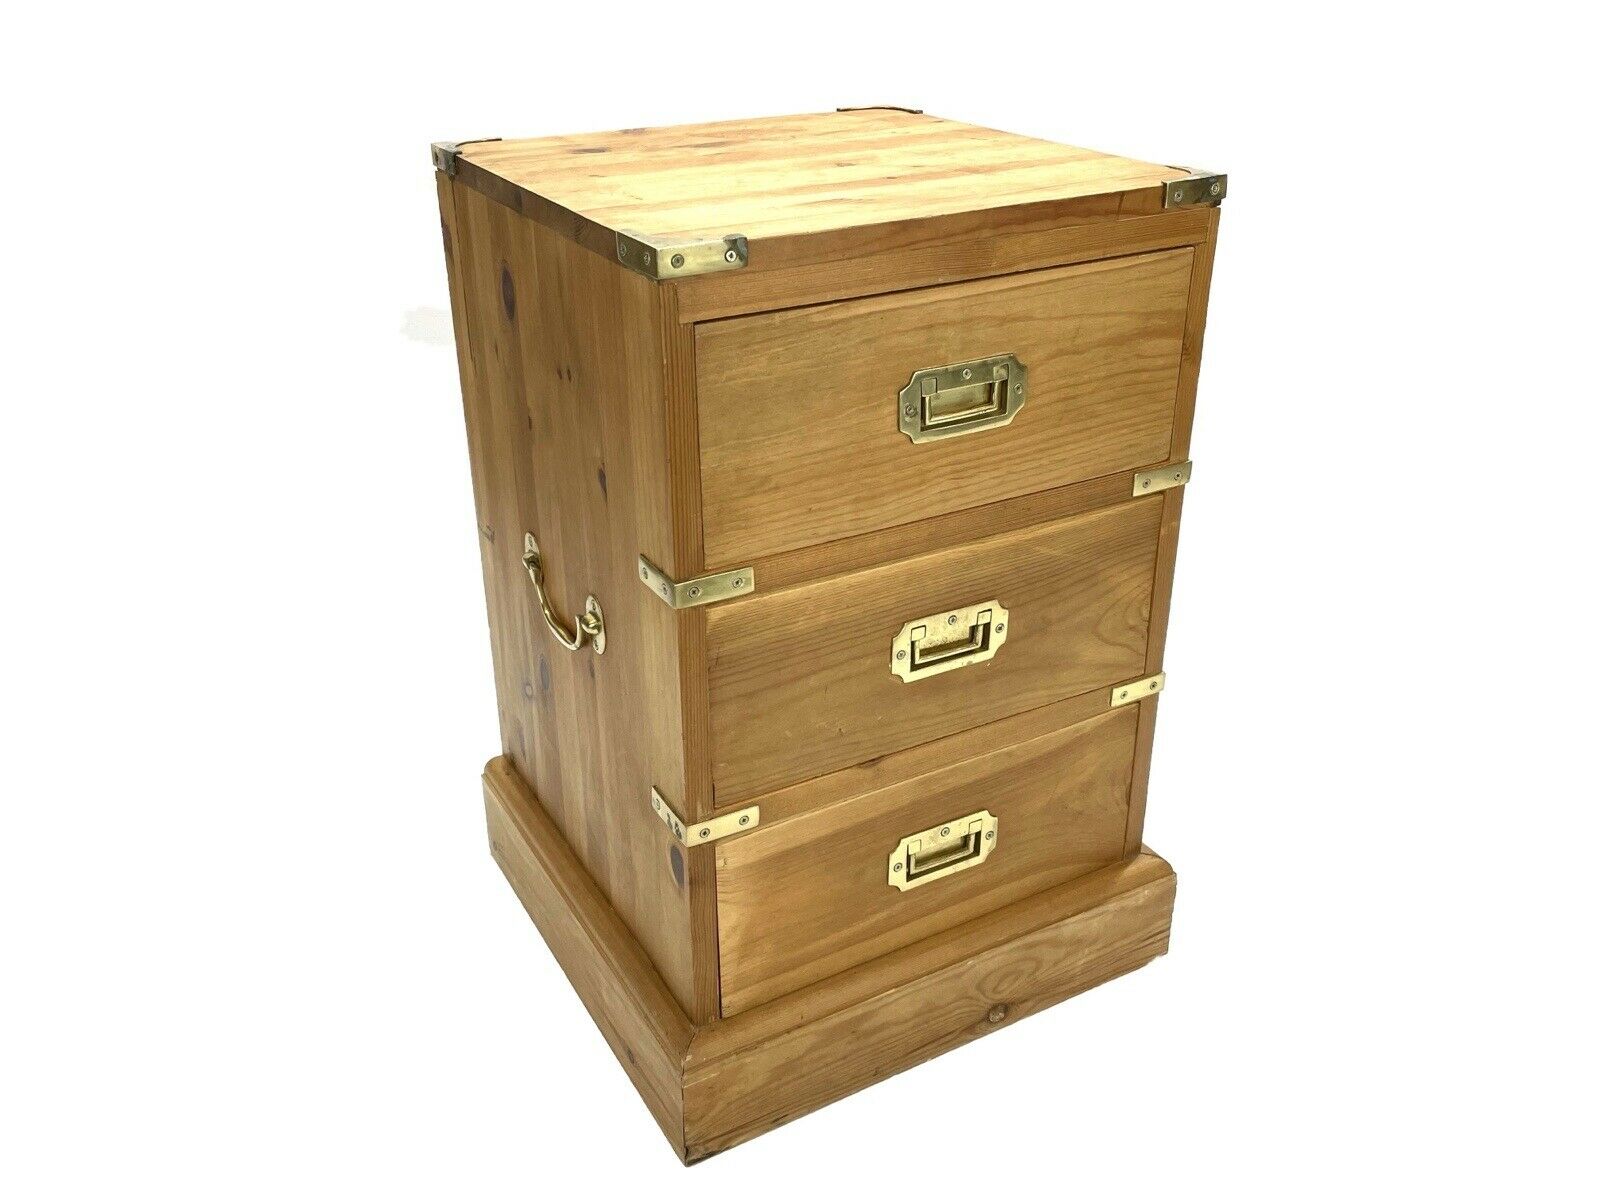 Campaign / Military Style, Brass Bound Pine Bedside Table / Drawers